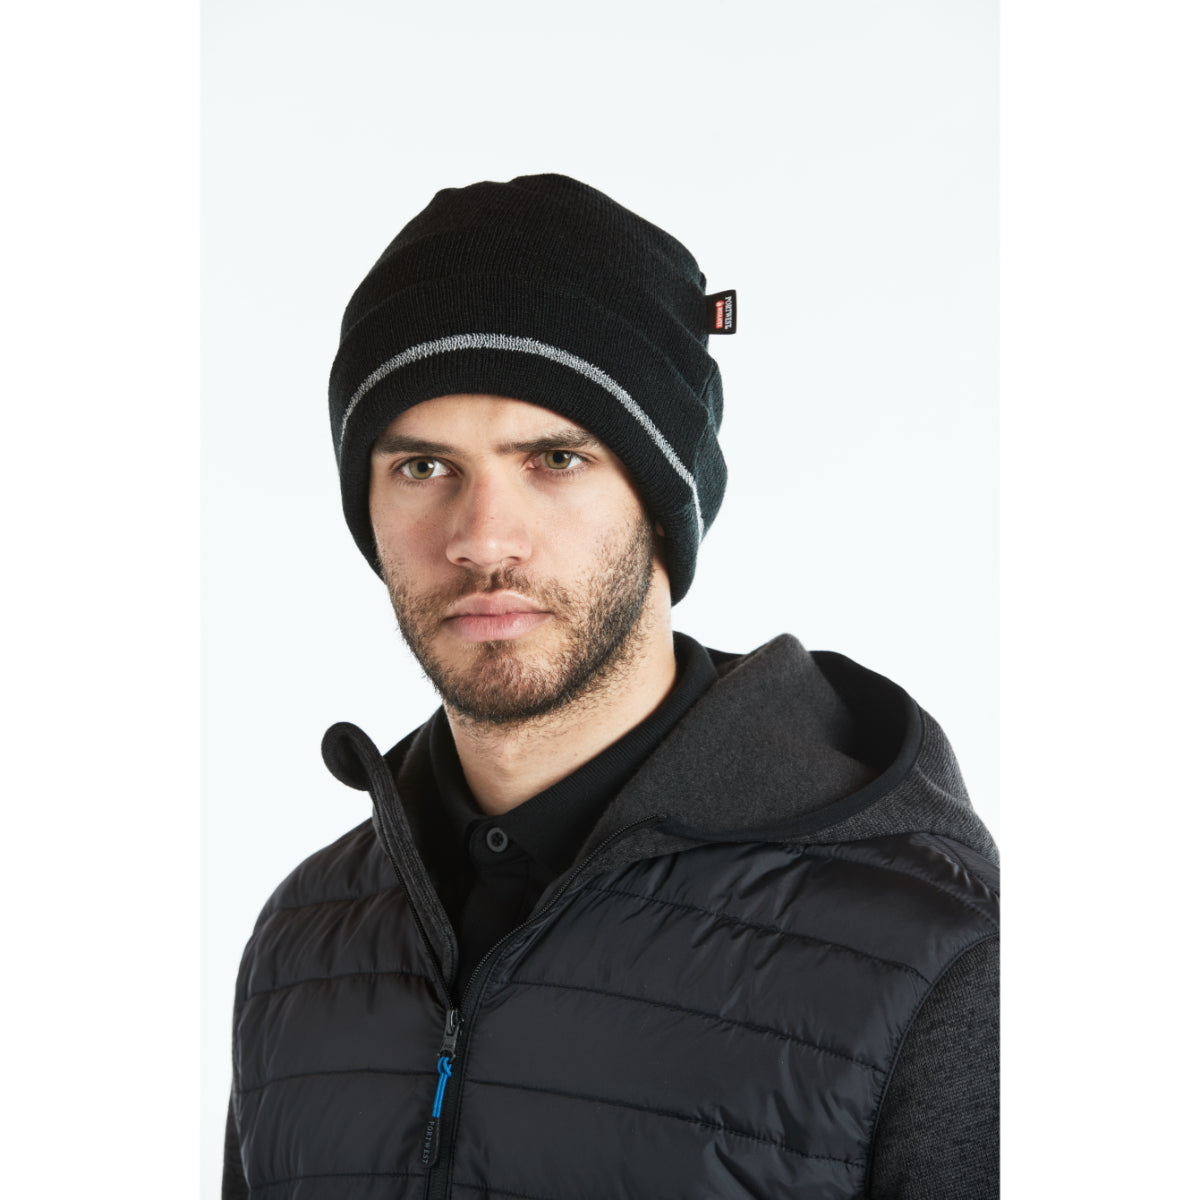 Portwest Reflective Trim Knit Hat Insulatex Lined